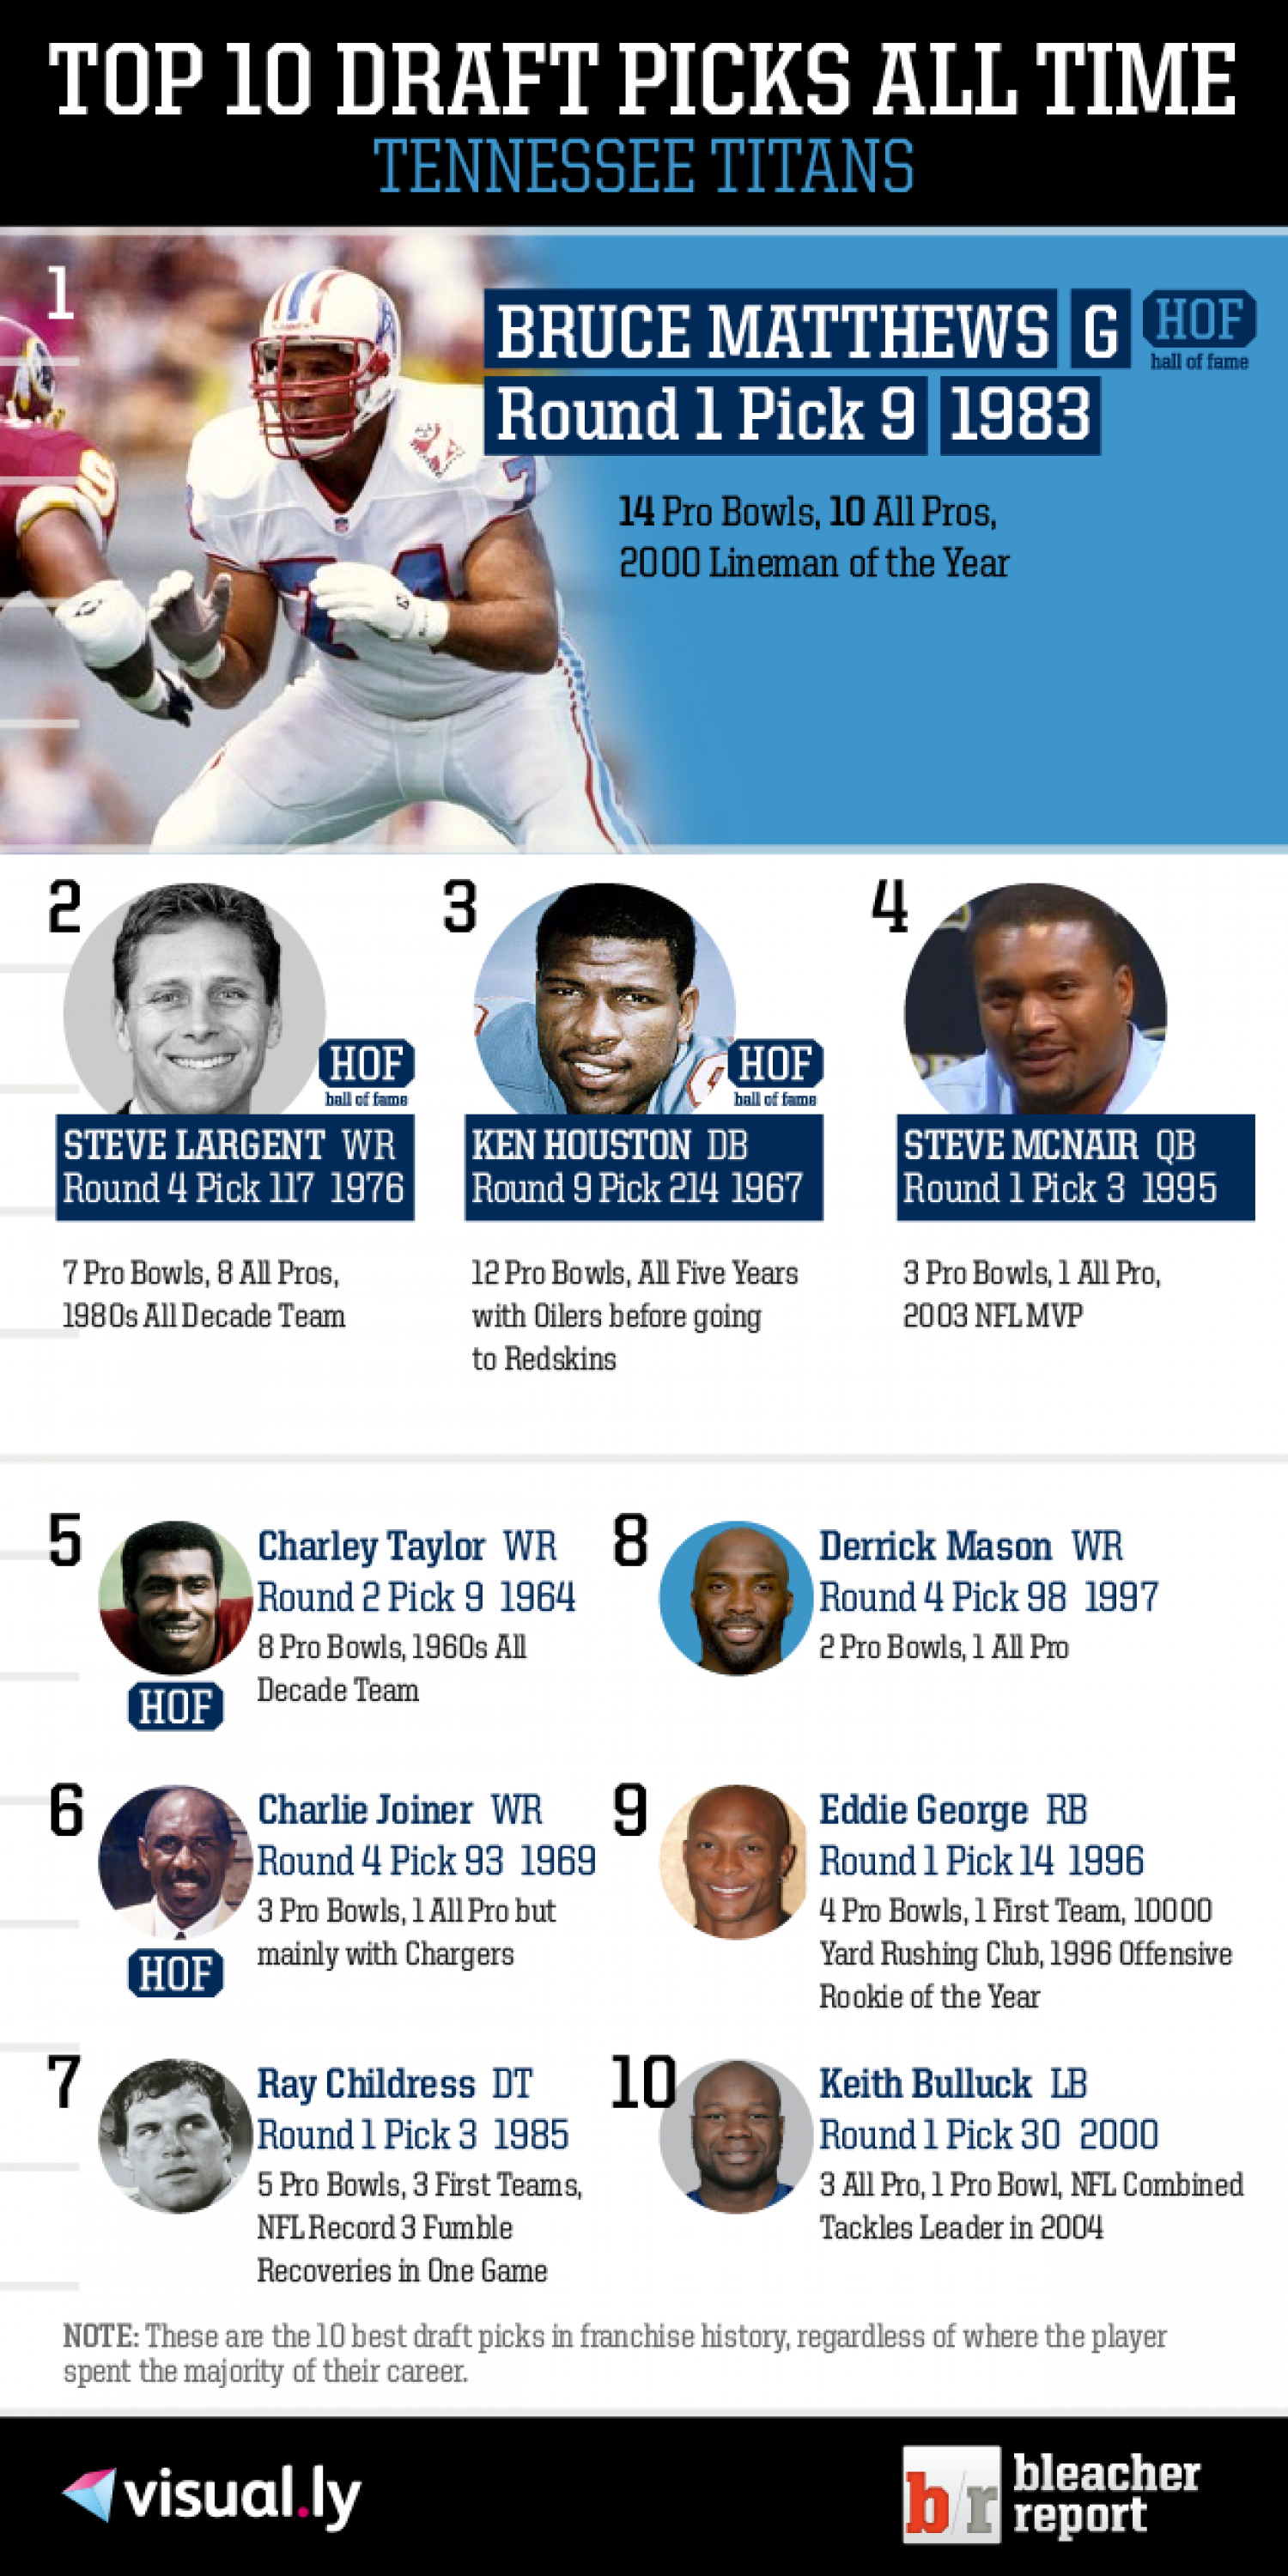 Top 10 Draft Picks of All Time: Tennessee Titans